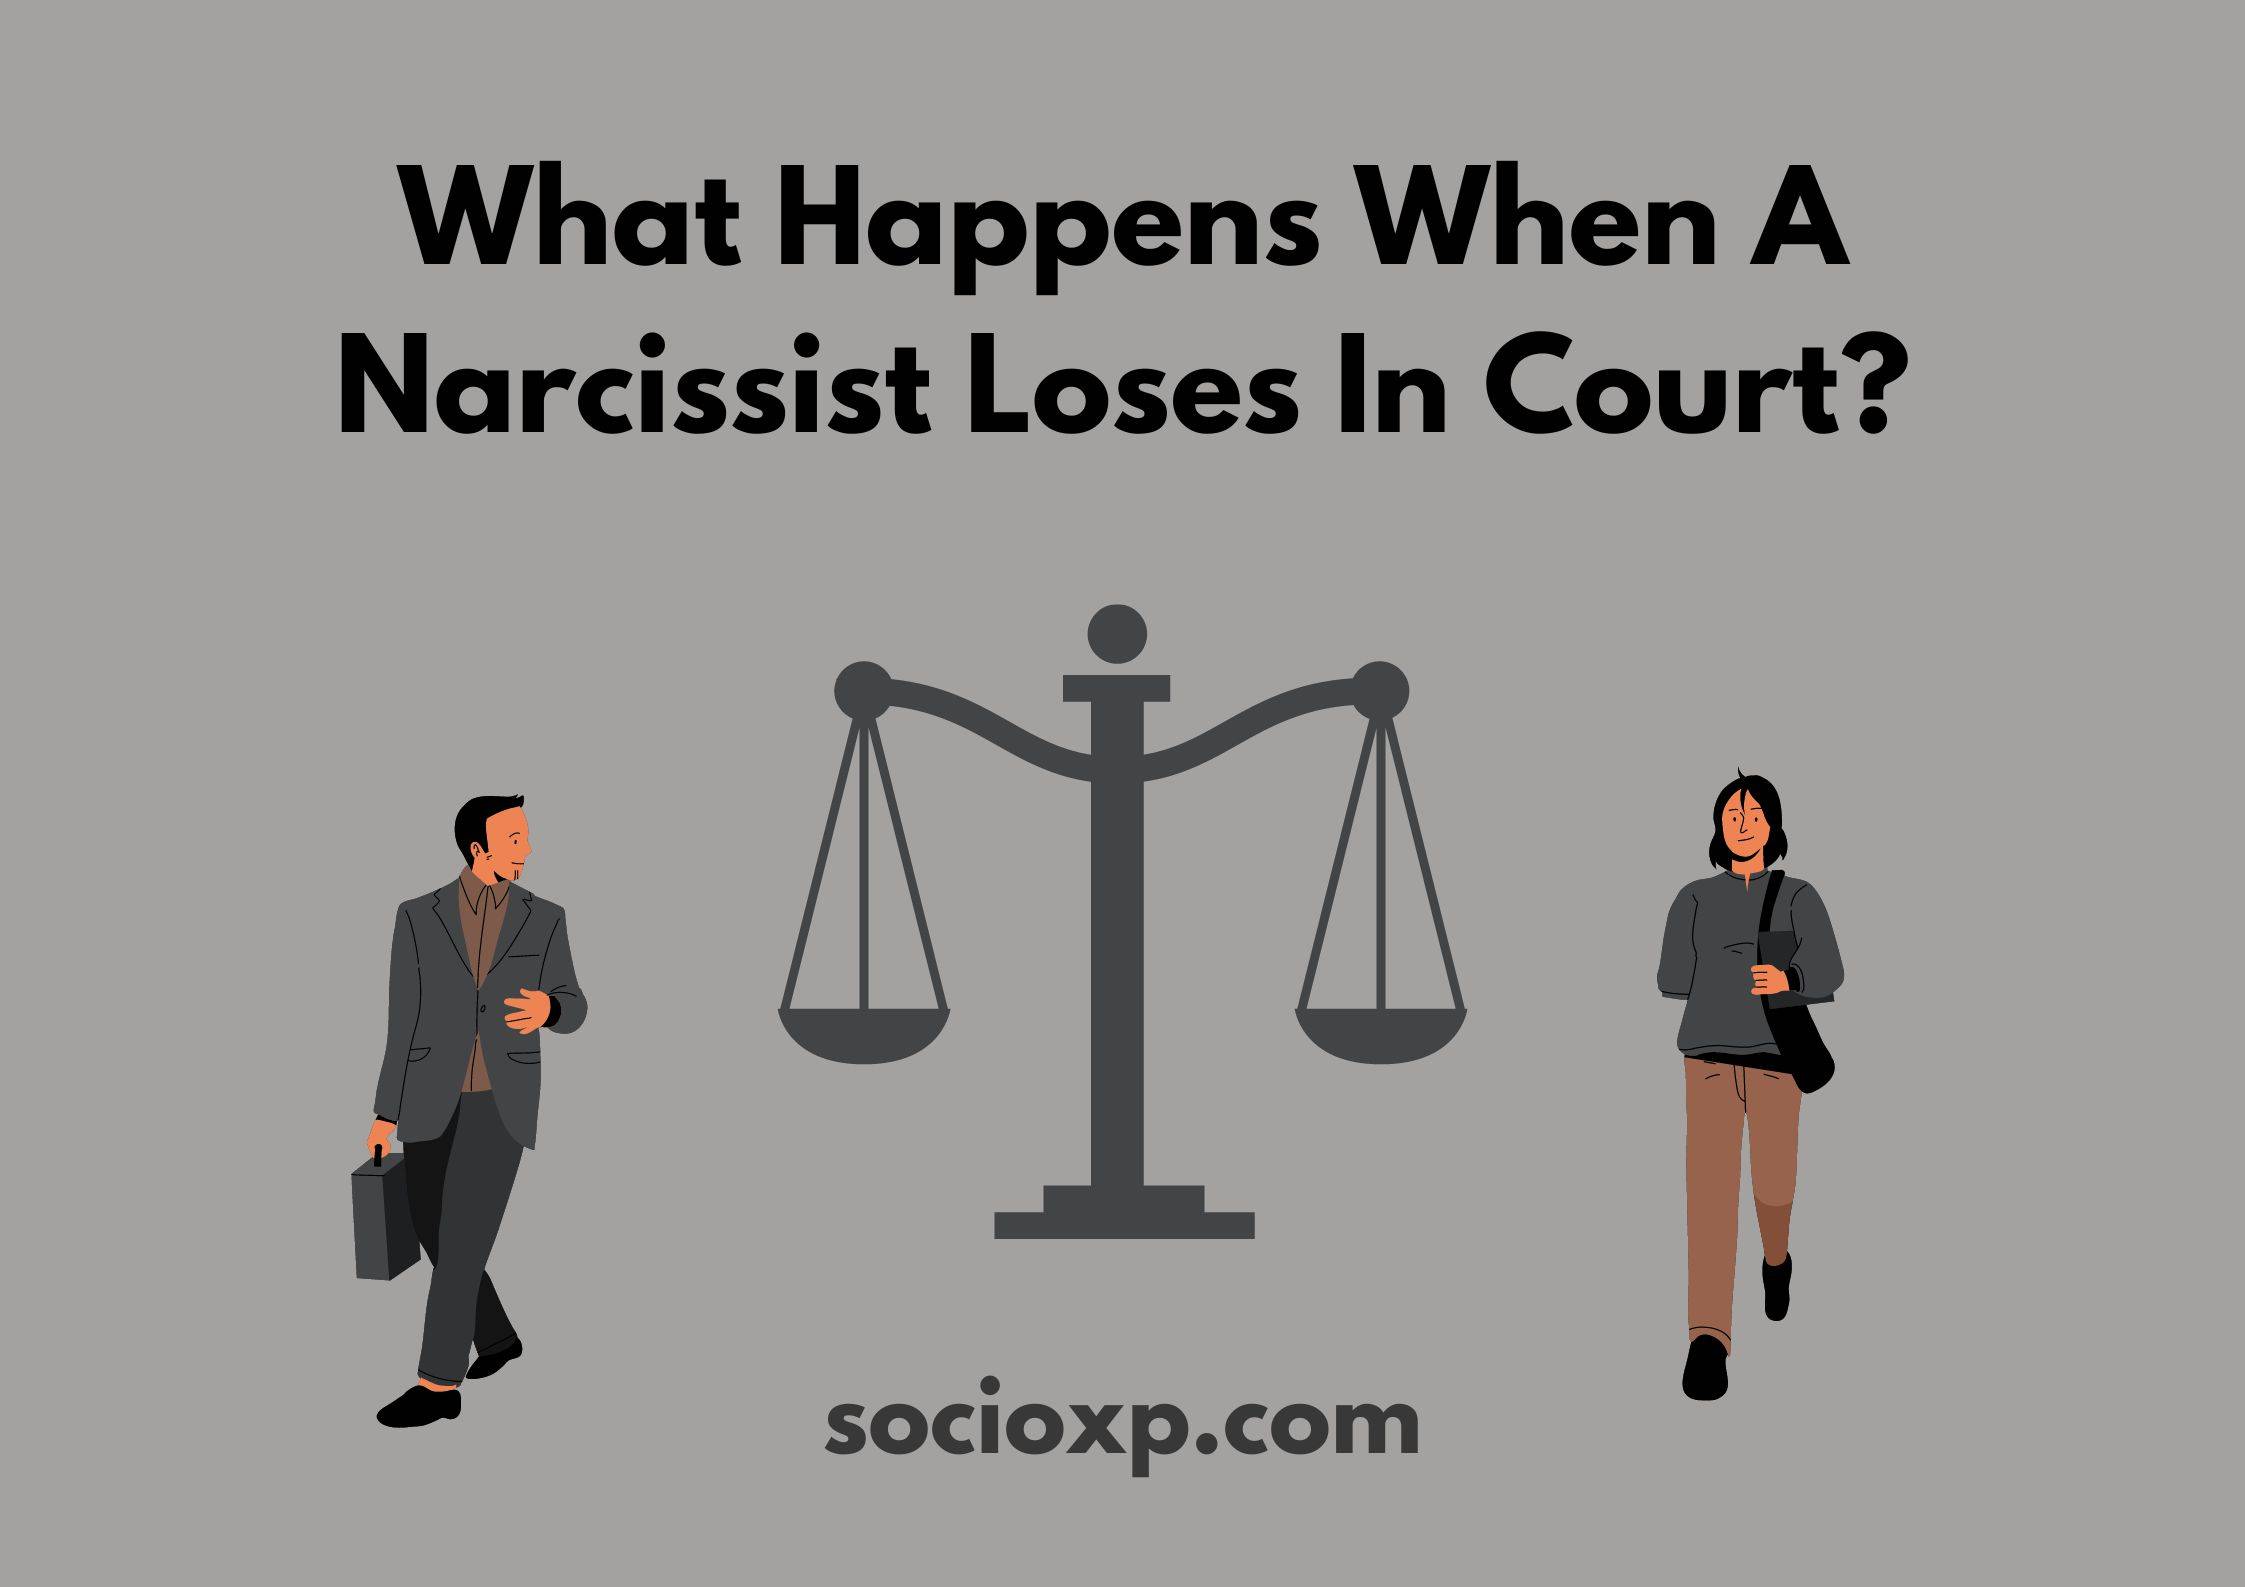 What Happens When A Narcissist Loses In Court?